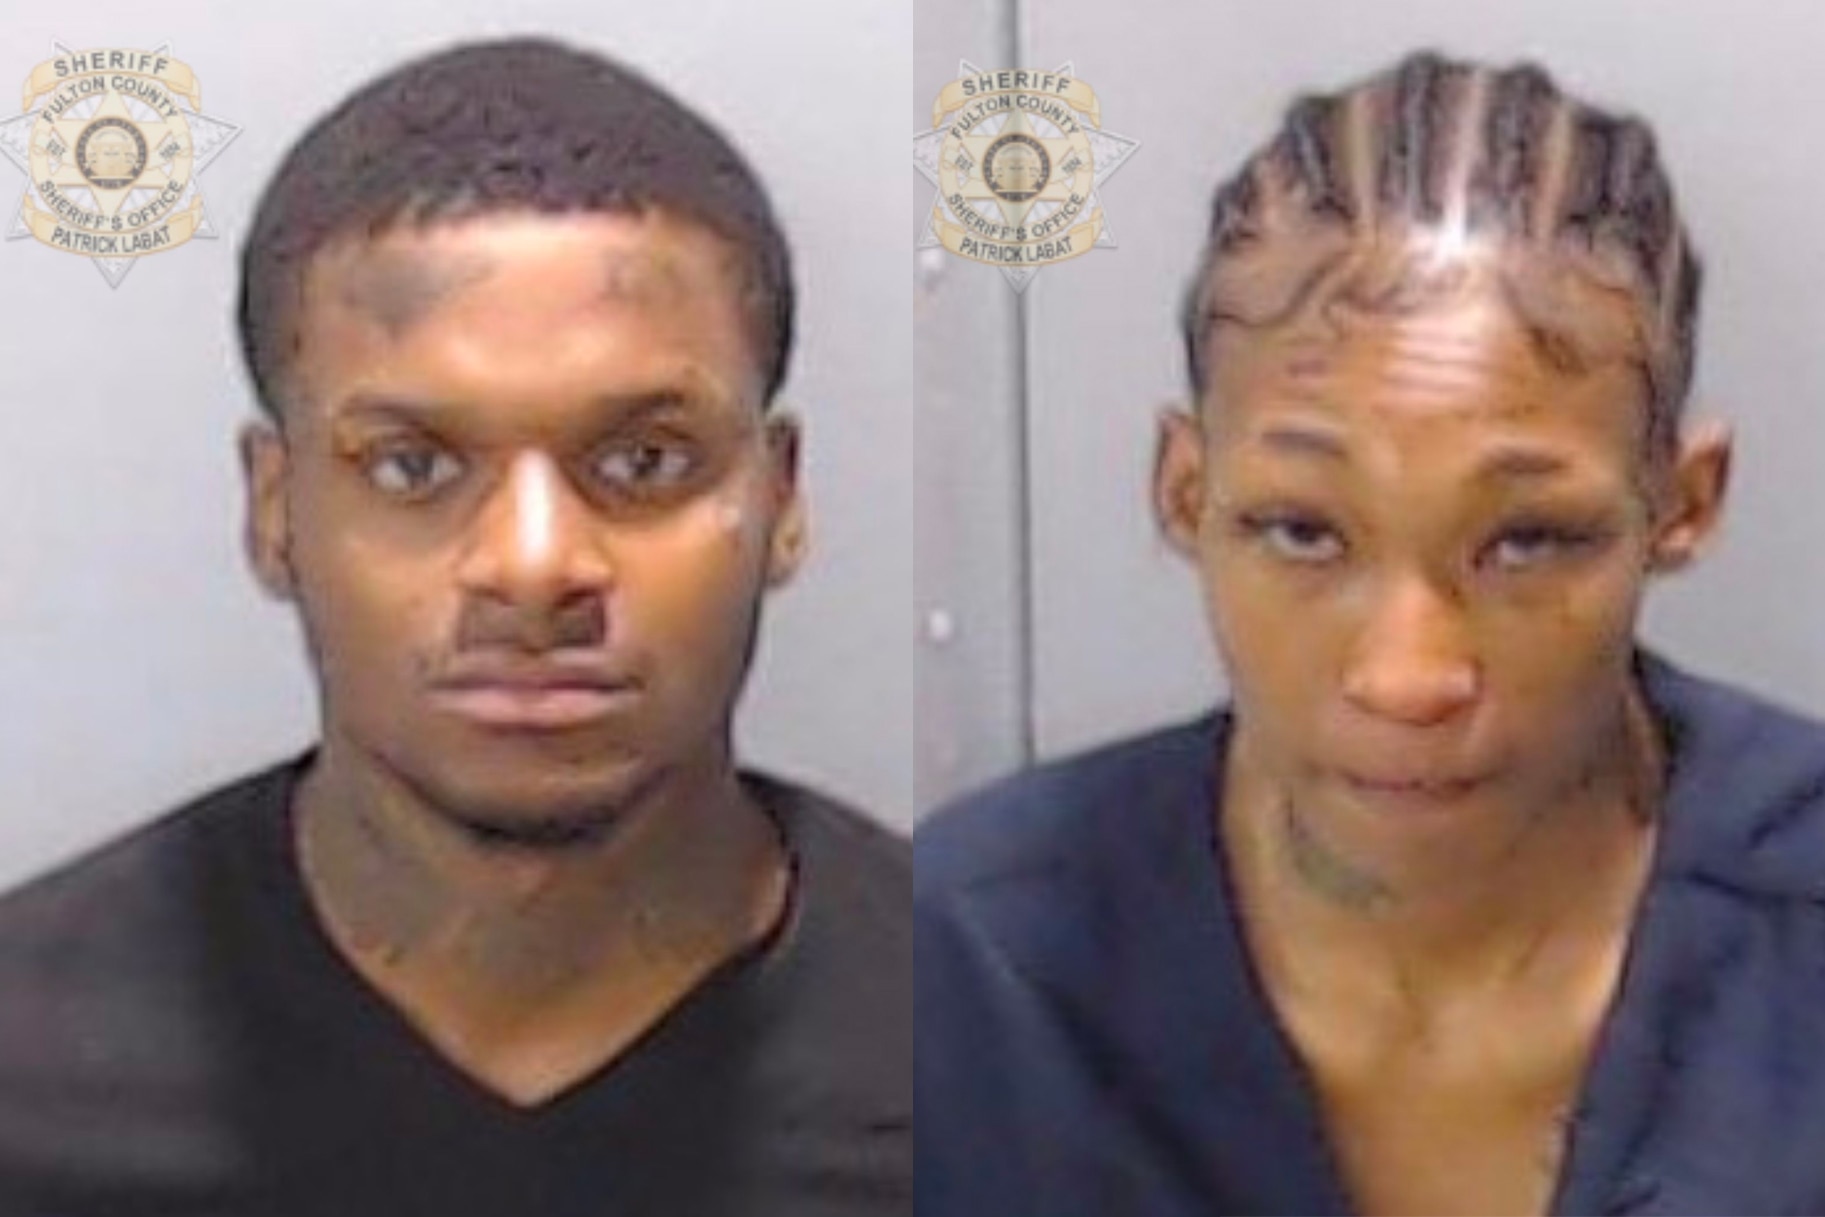 Police handout photos of Colvin Lindsey and Teandra Brox